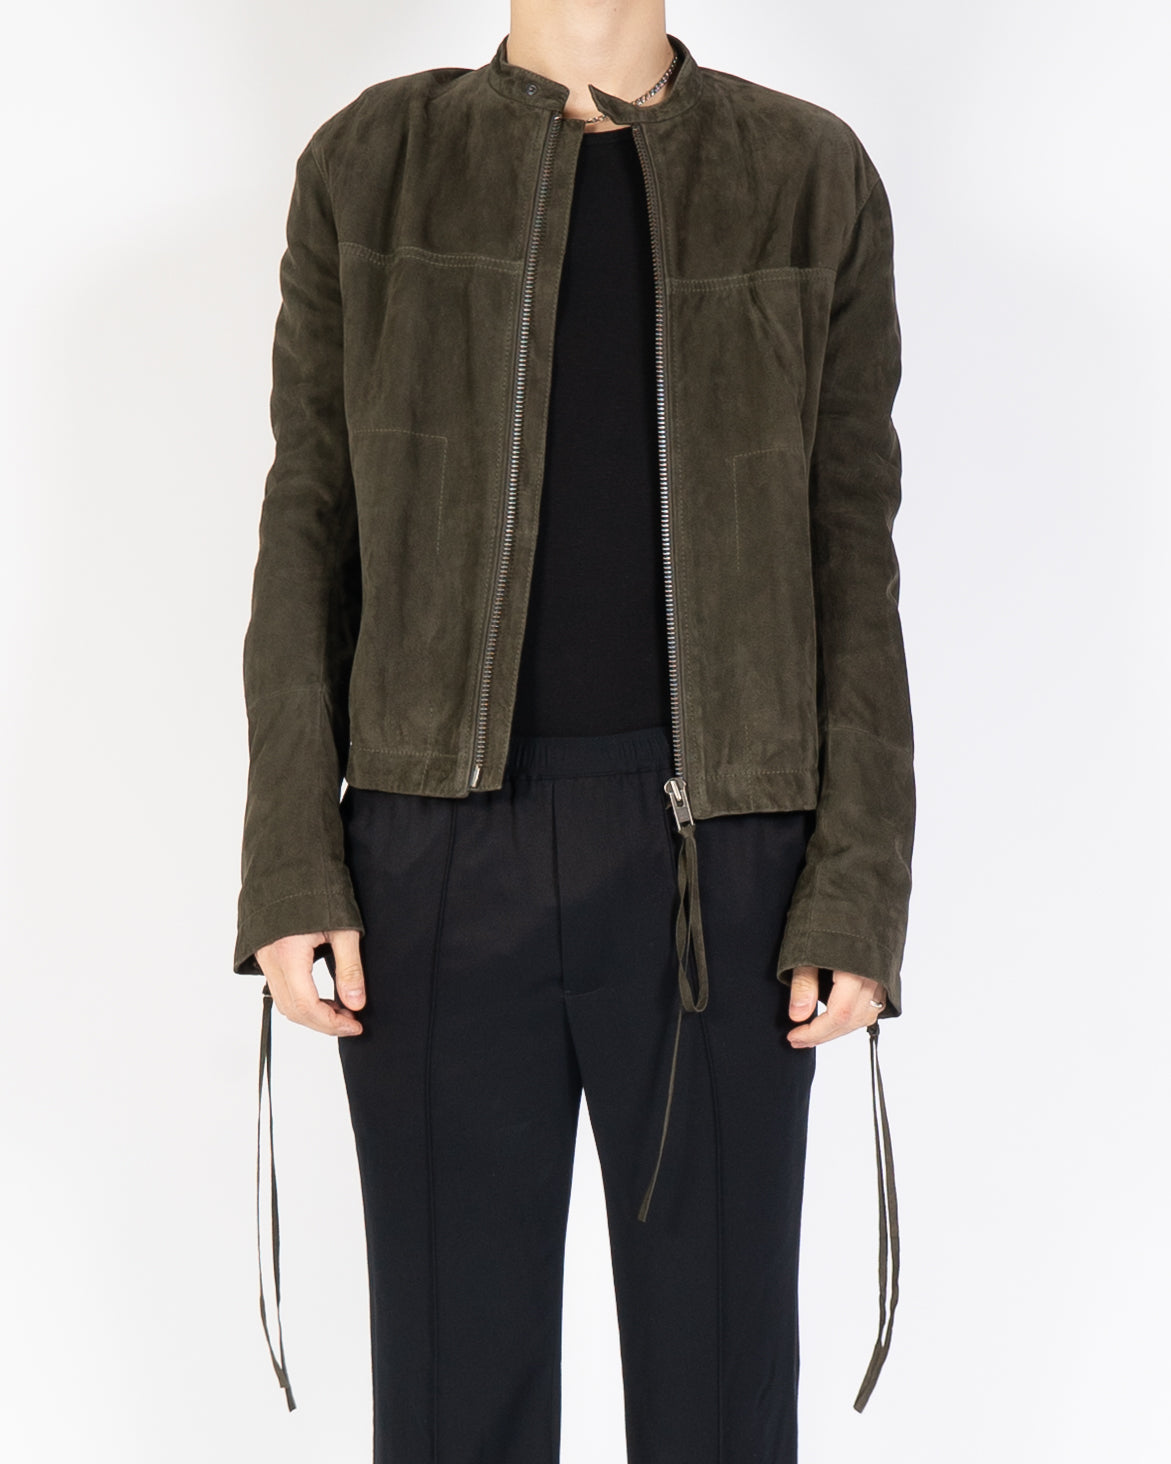 SS18 Olive Suede Leather Zipped Jacket